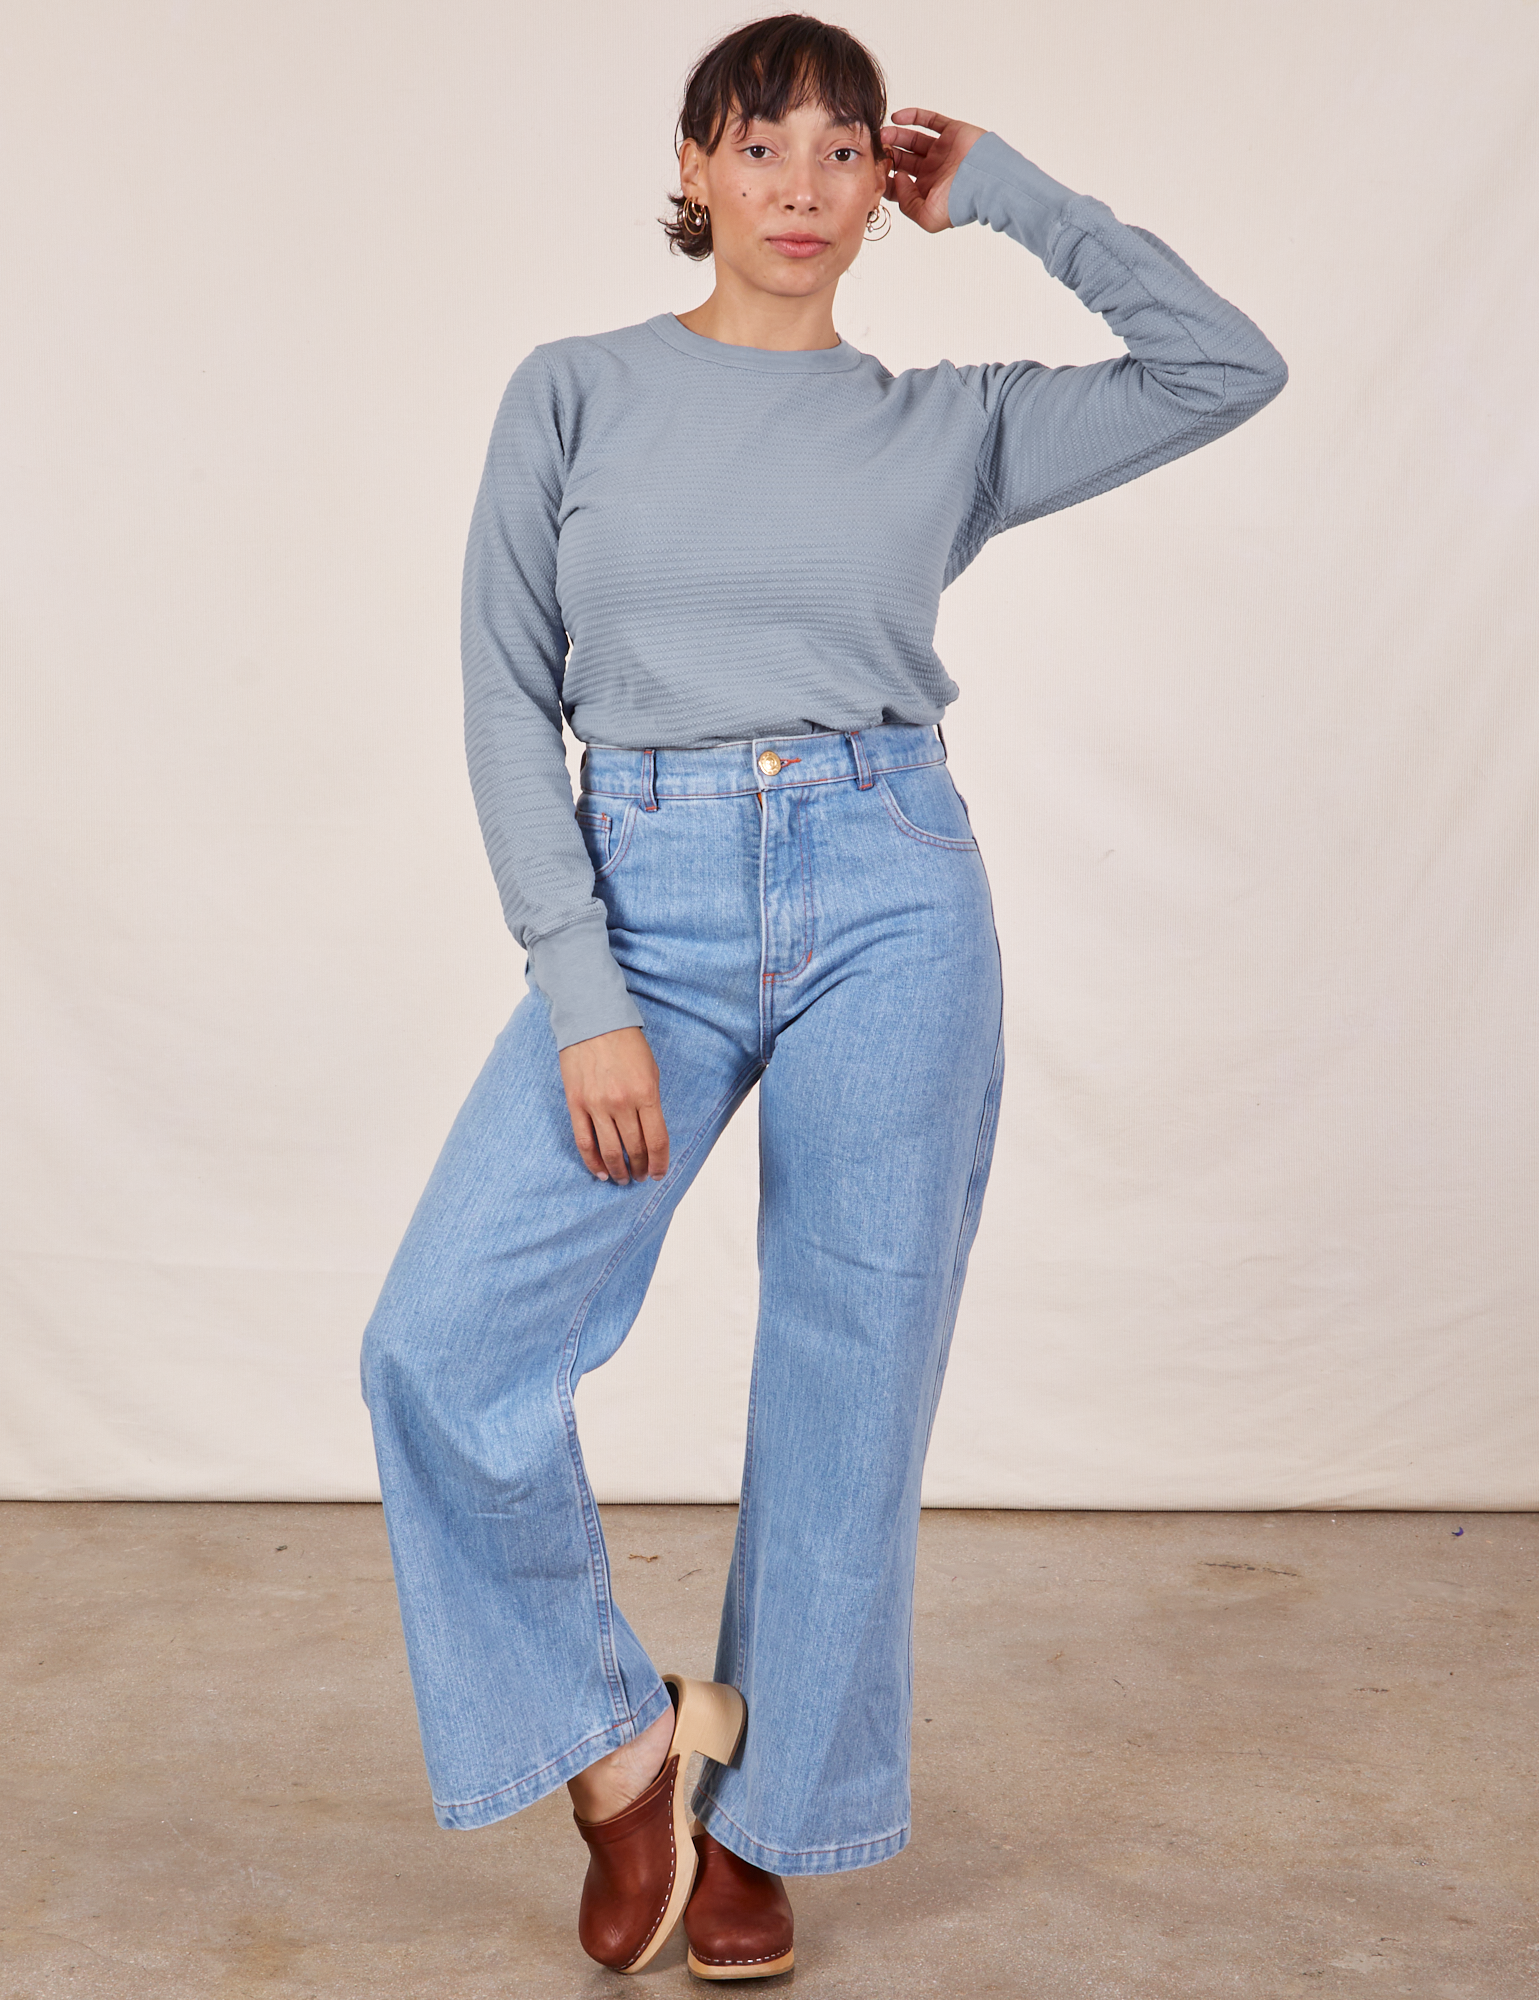 Tiara is wearing Honeycomb Thermal in Periwinkle tucked into light wash Sailor Jeans